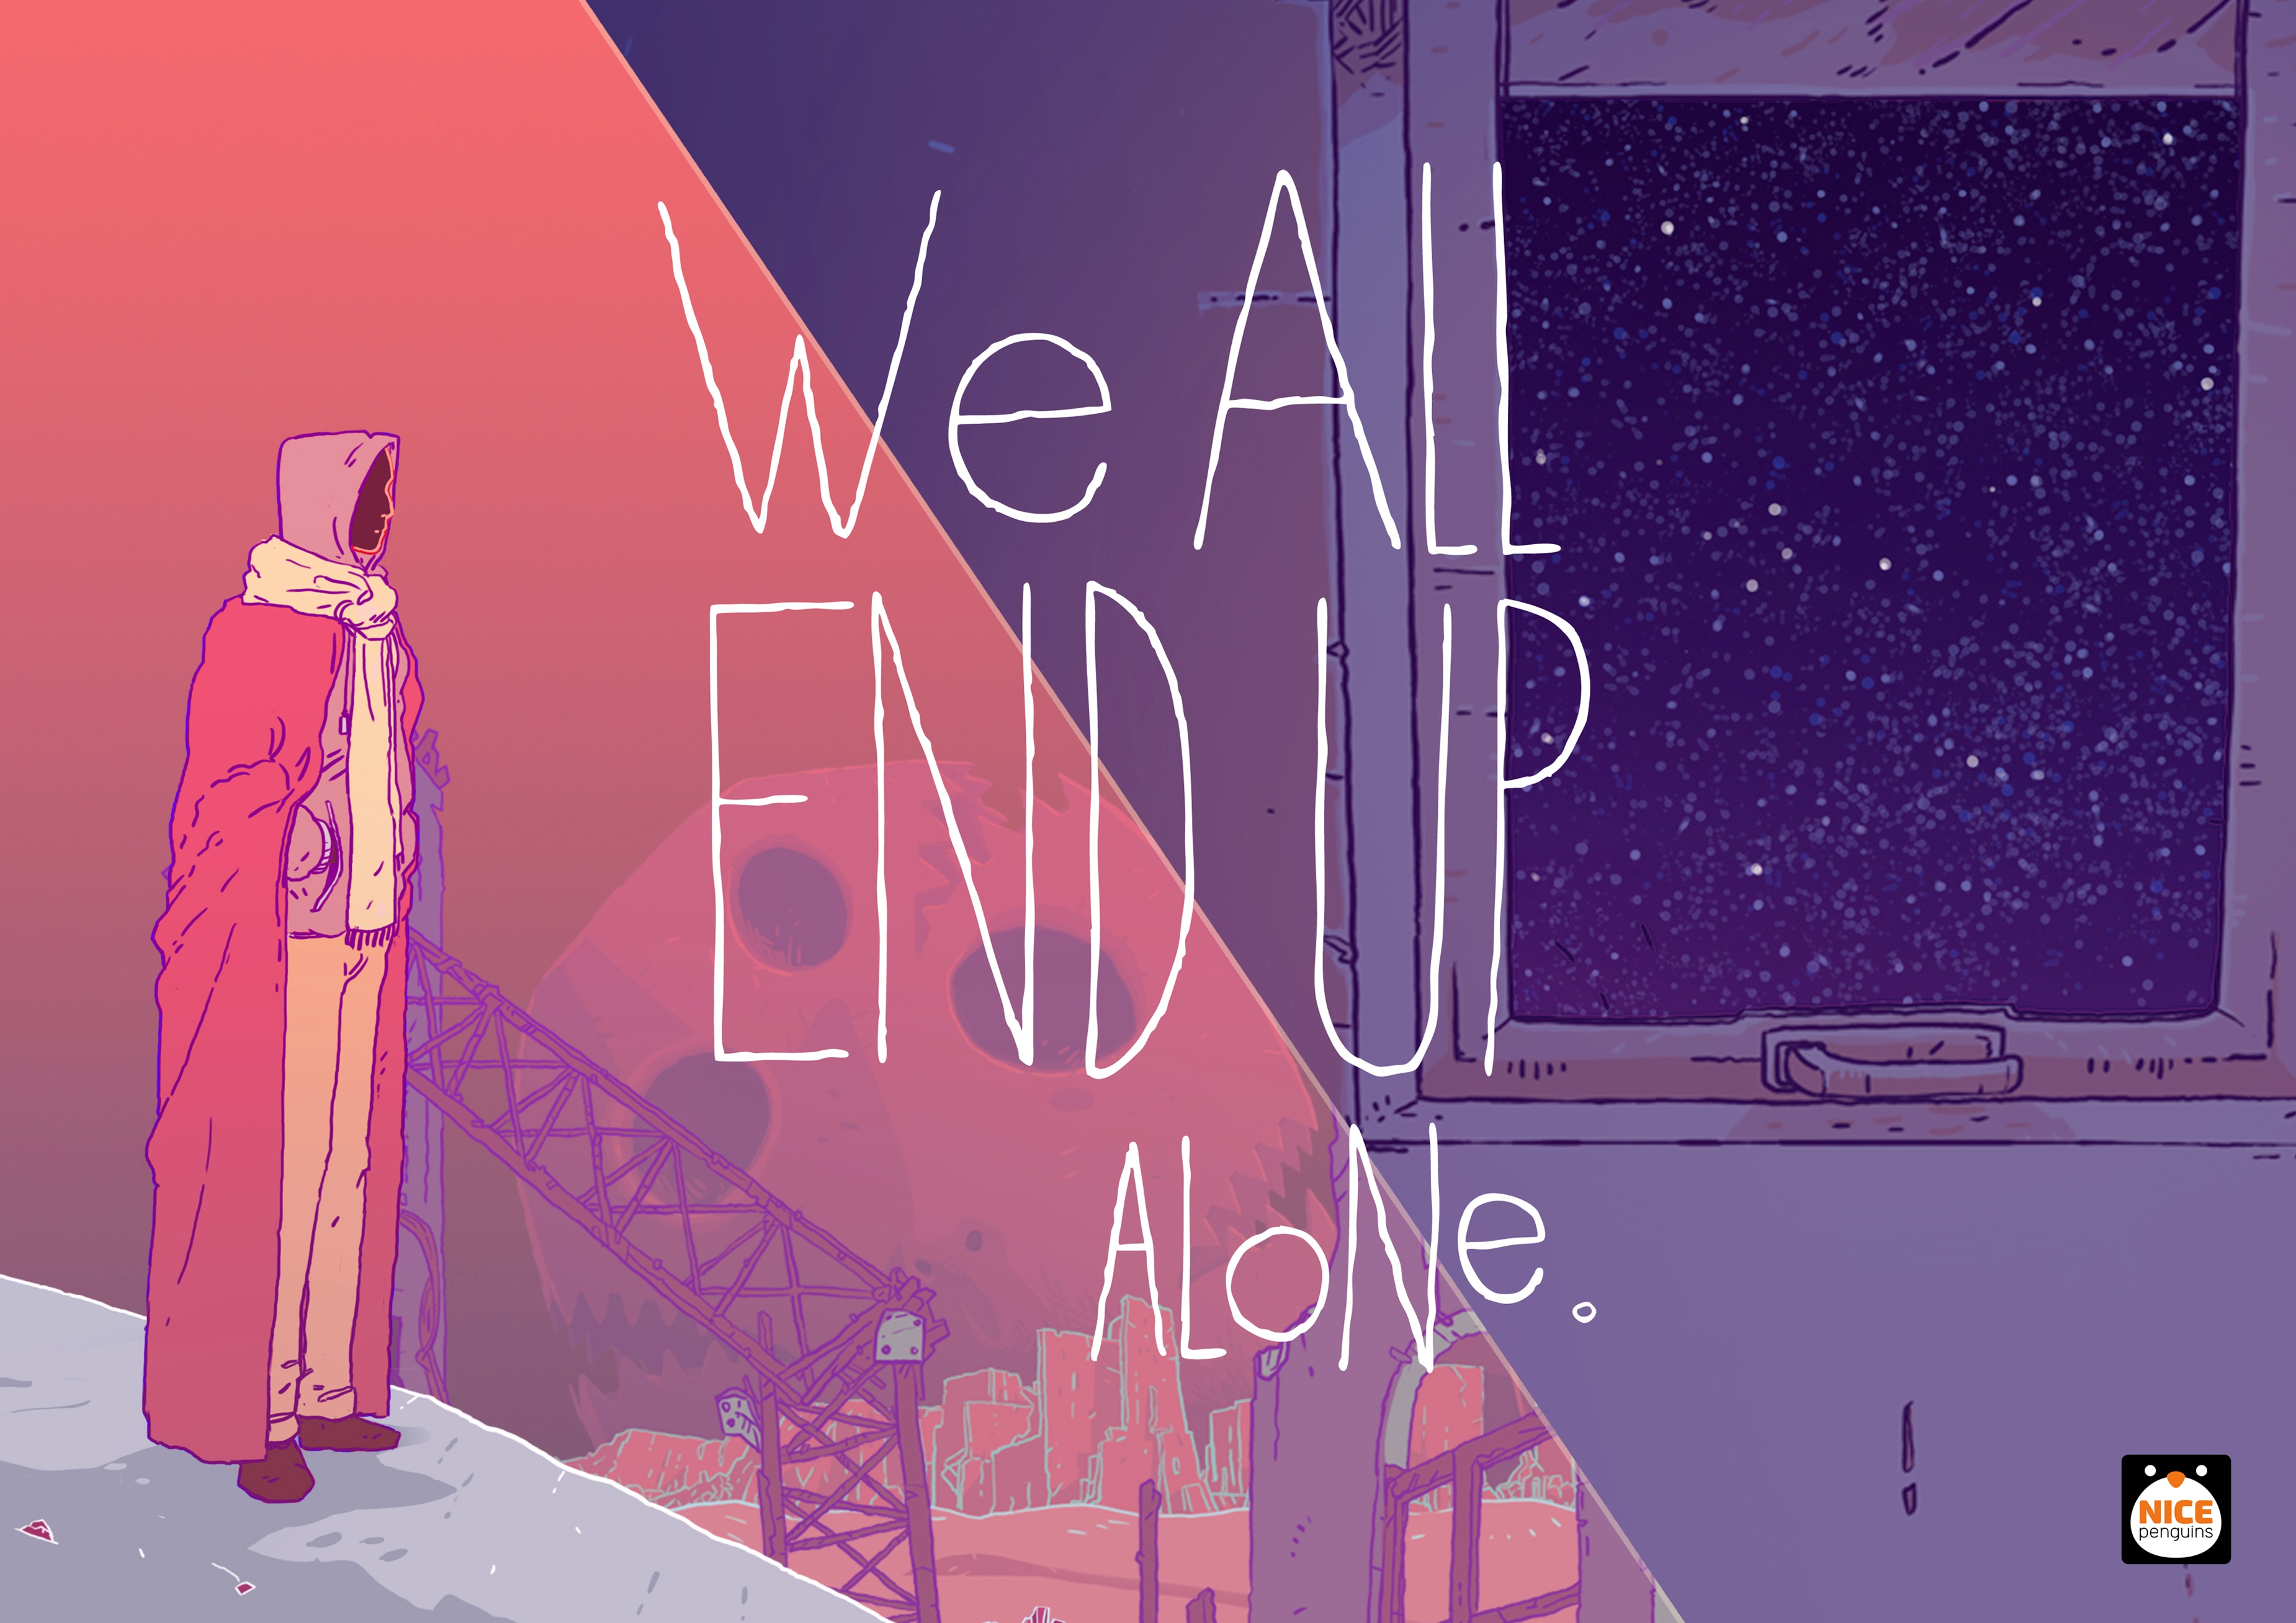 End up living. End up. We are all Alone. All Alone is all we are.